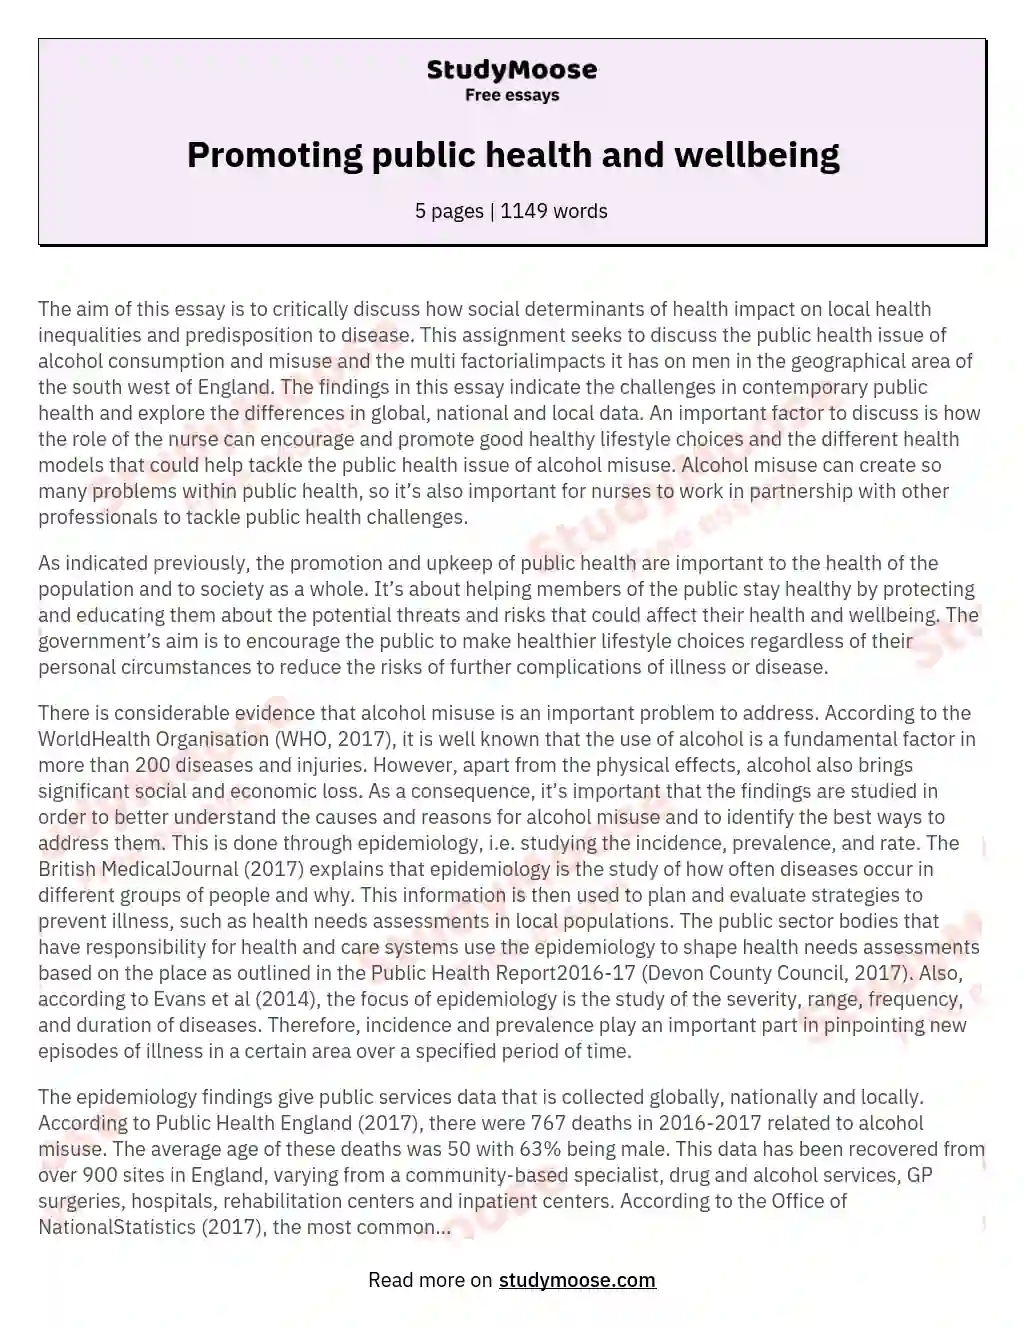 Promoting public health and wellbeing essay